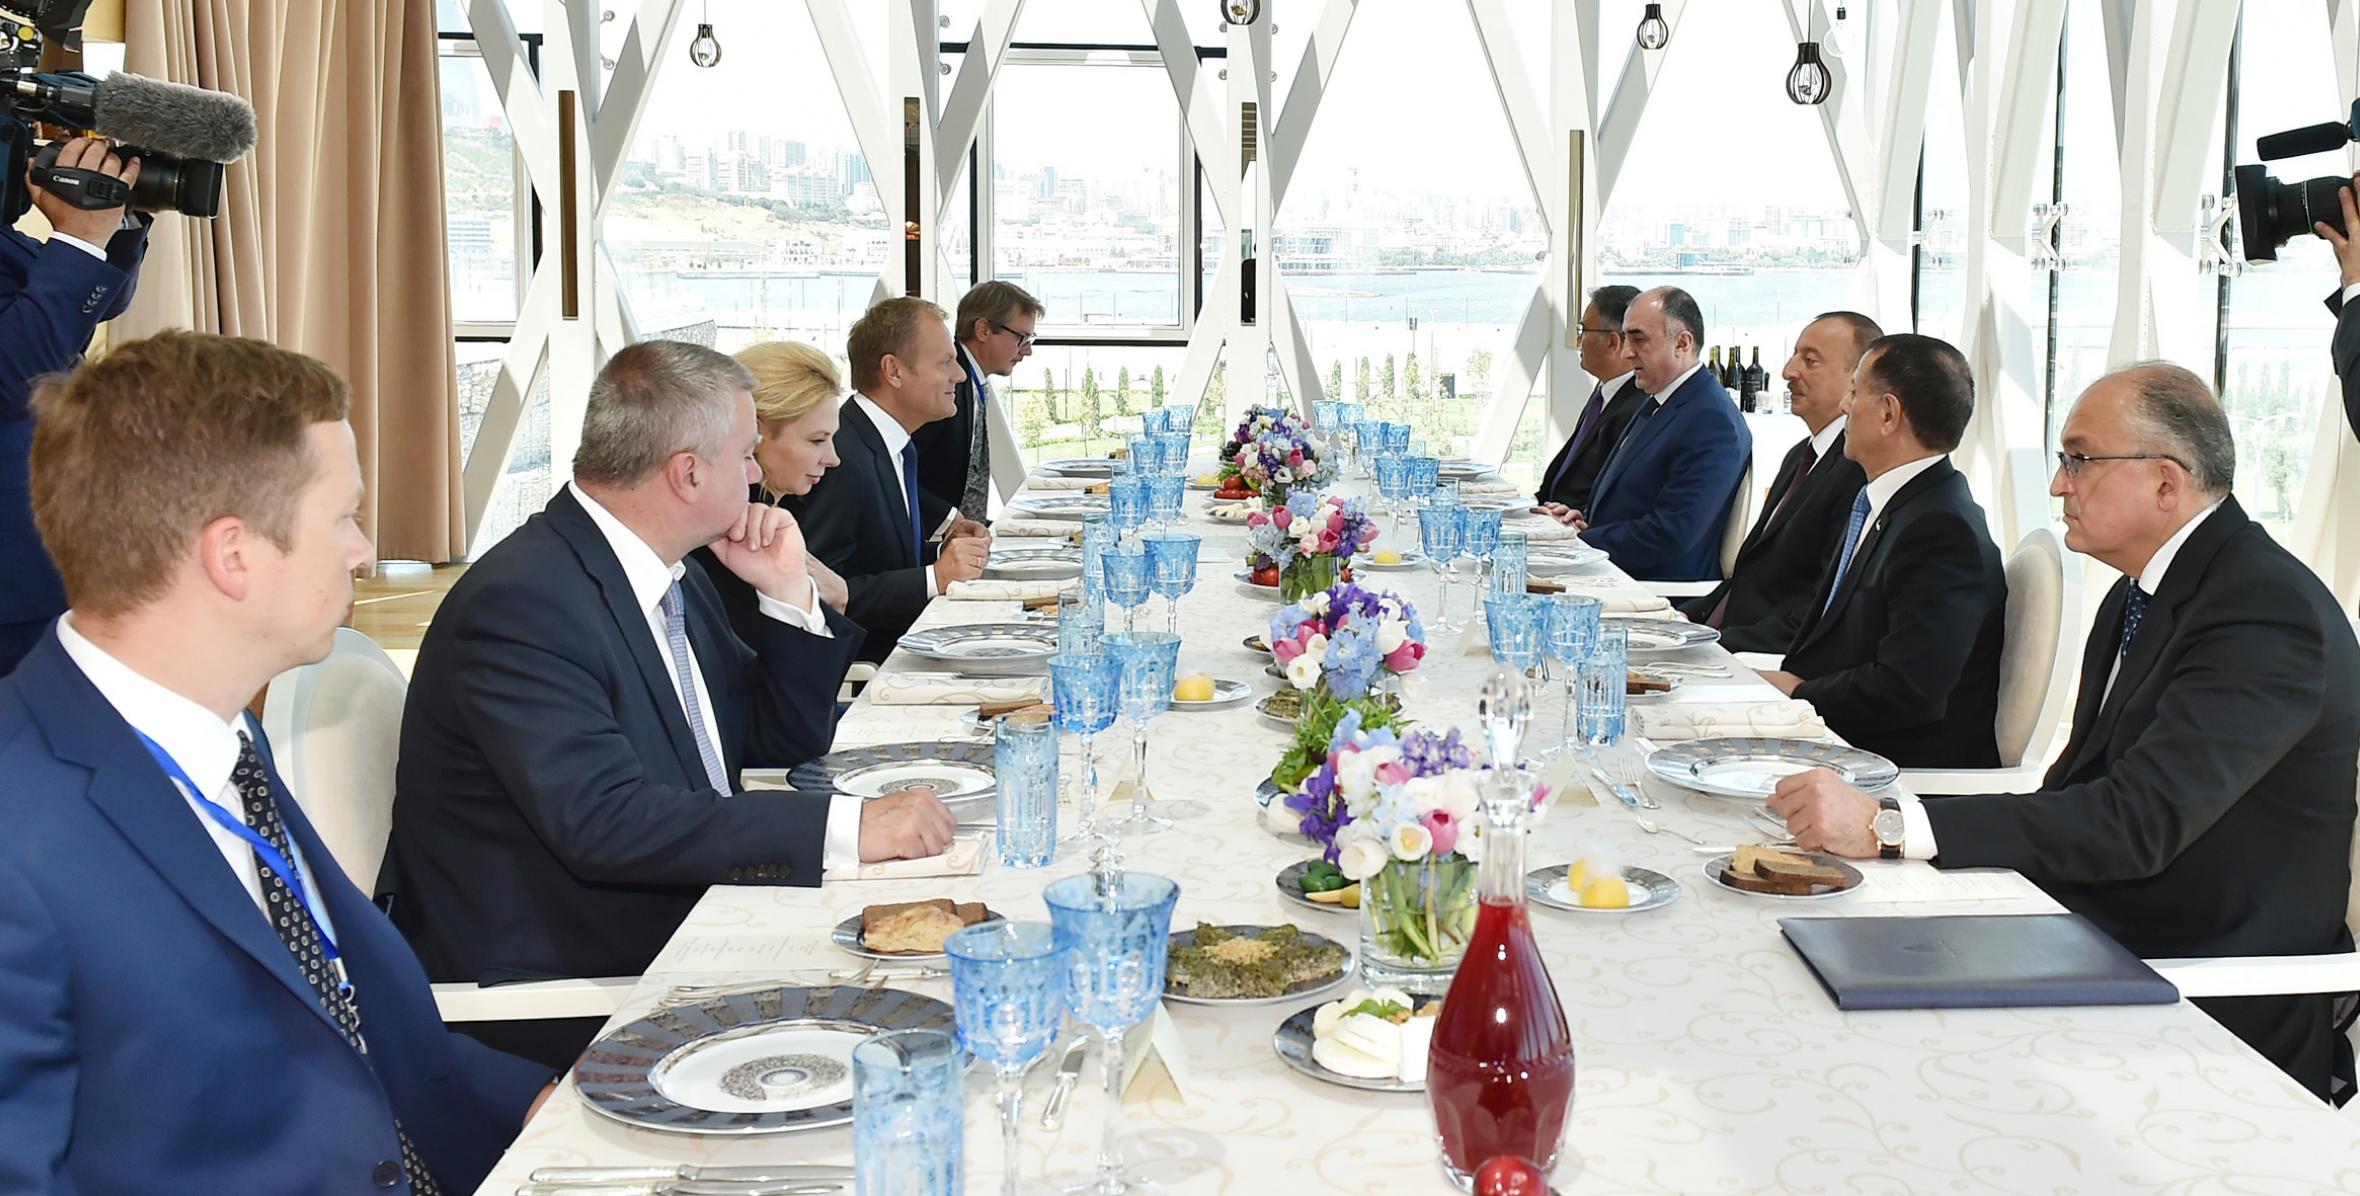 Ilham Aliyev hosted an official dinner in honor of President of the European Council Donald Tusk